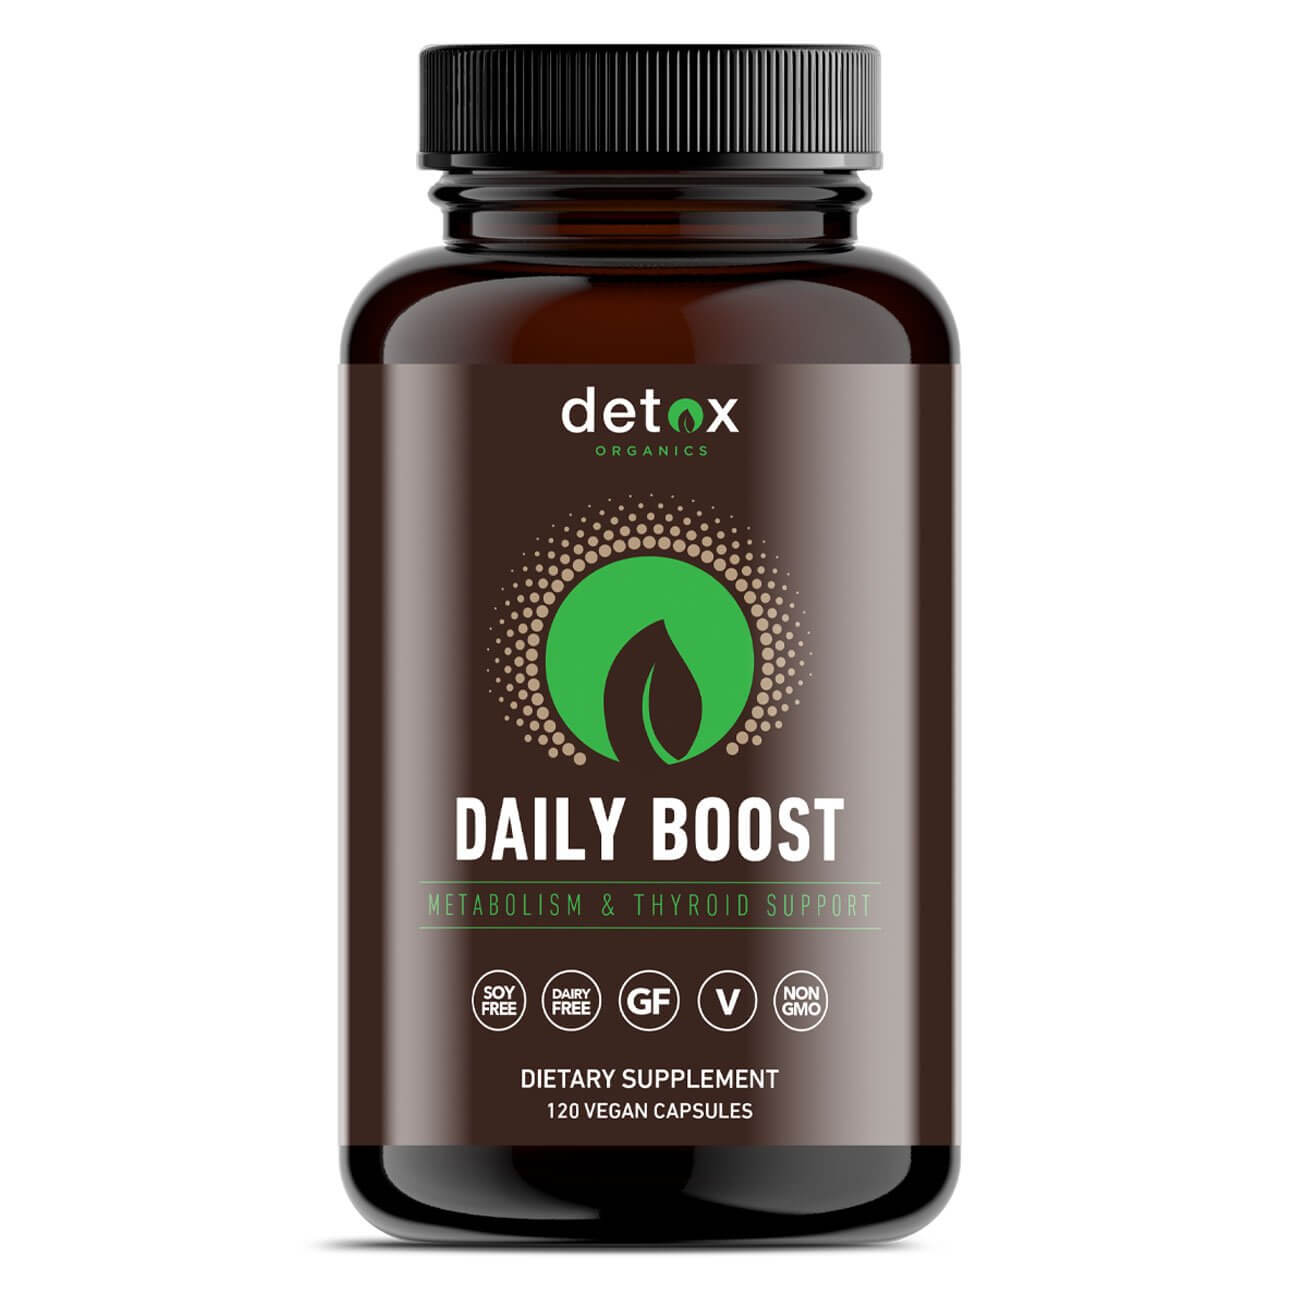 Daily Boost